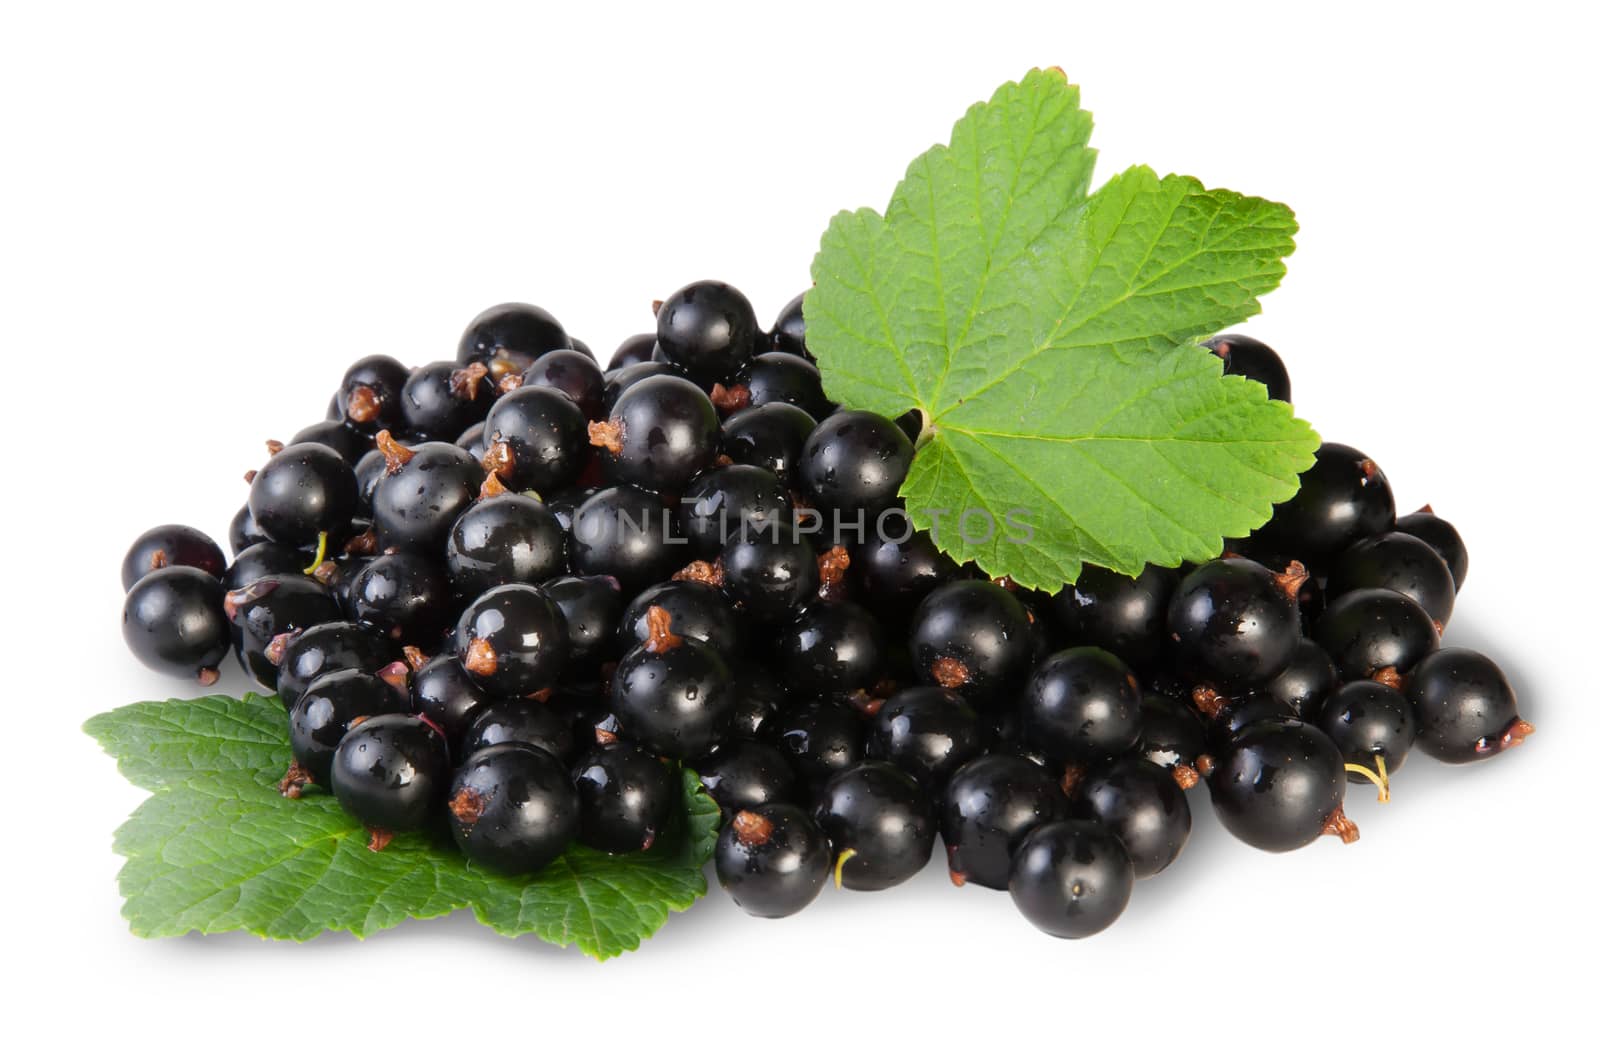 Bunch Of Black Currant With Two Leafs by Cipariss